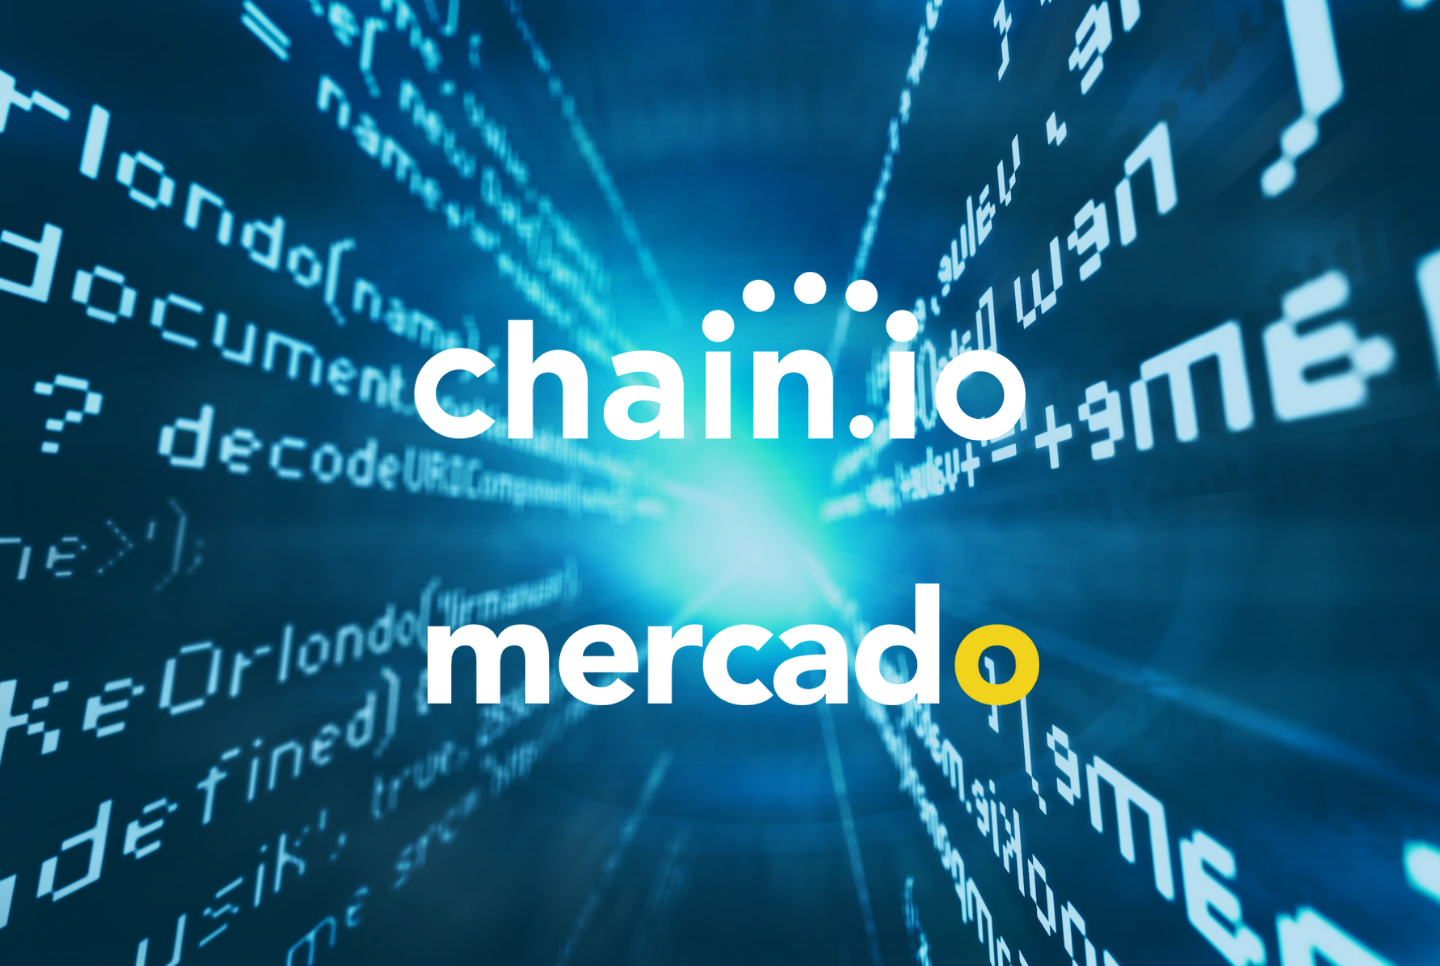 Mercado, a SaaS supply chain platform helping importers to connect with their global trading partners, has announced the selection of Chain.io as their preferred integration partner.